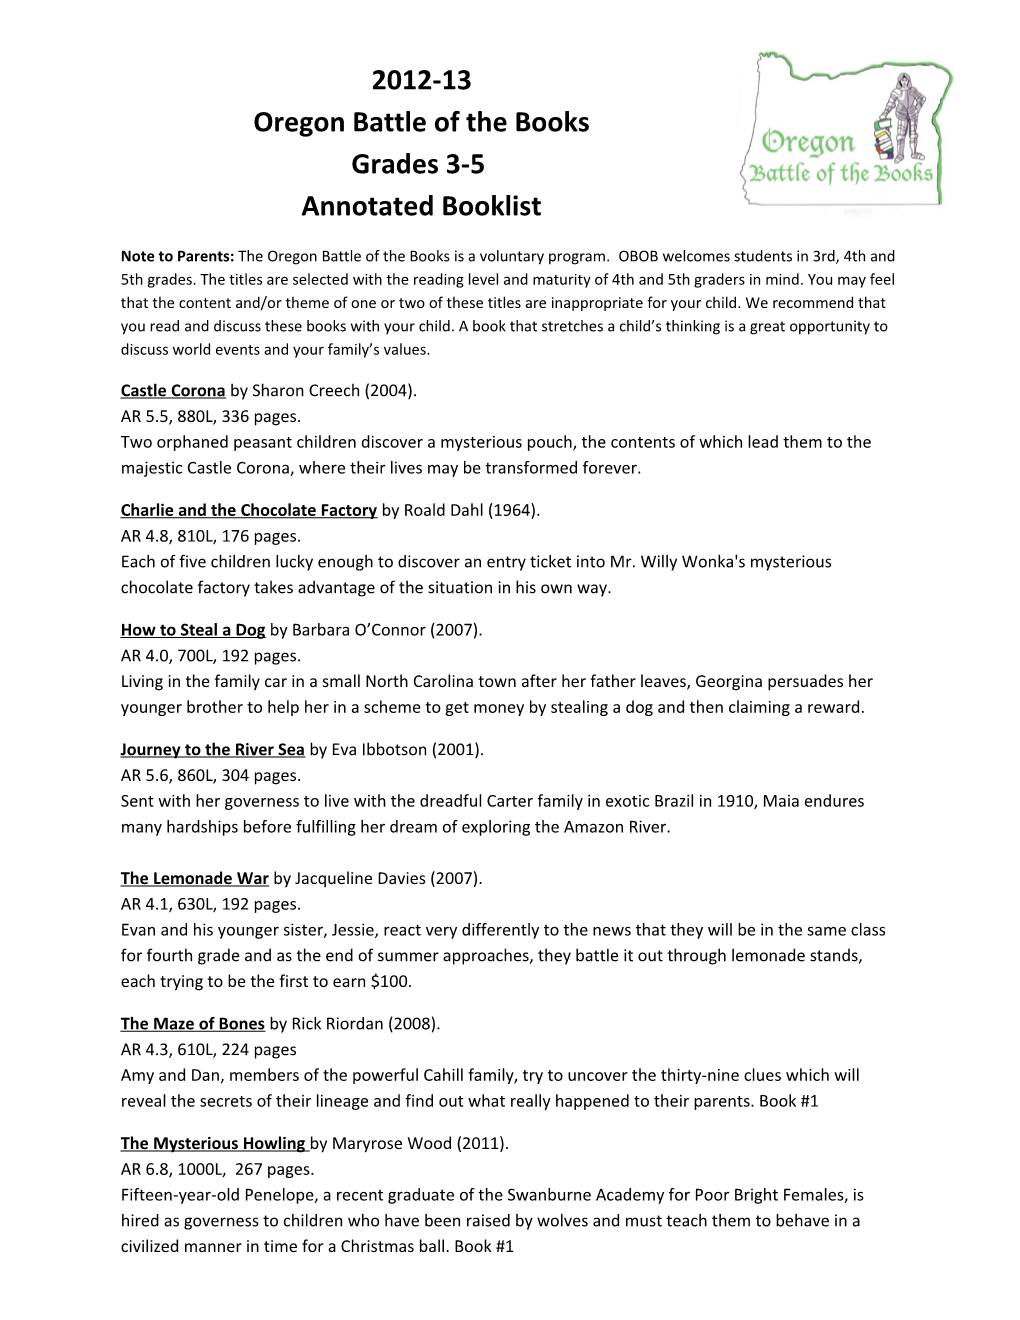 2012-13 Oregon Battle of the Books Grades 3-5 Annotated Booklist